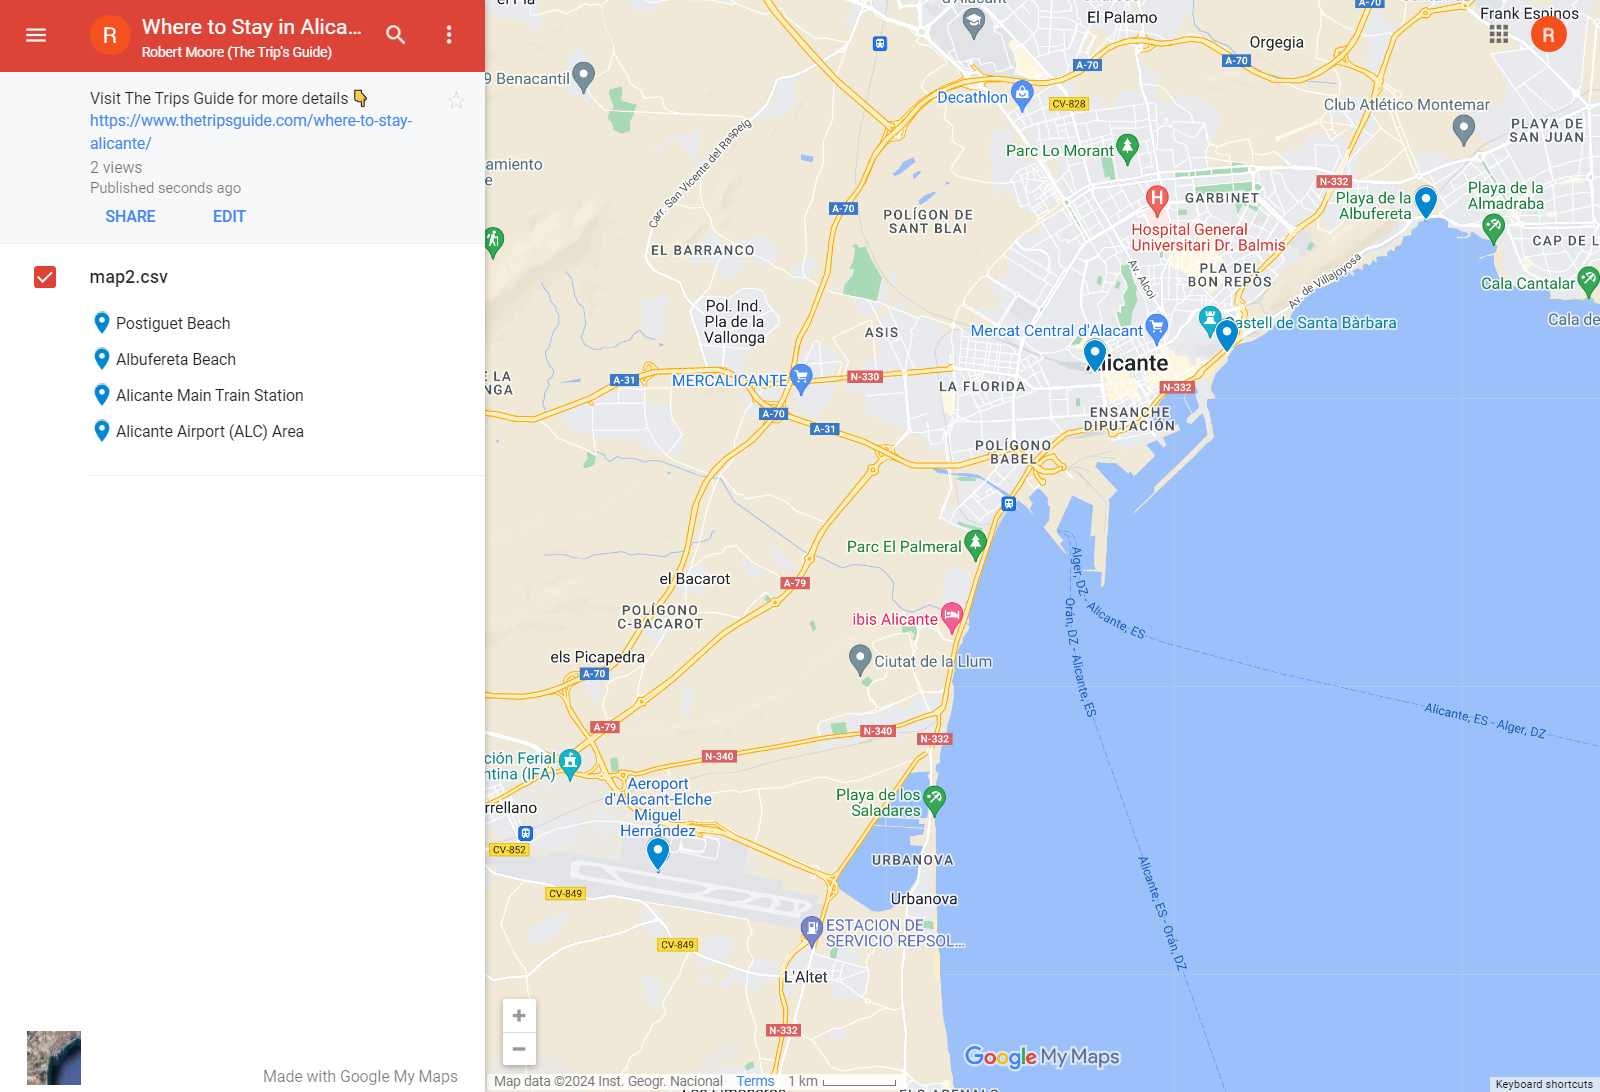 Map of the Best Areas to Stay in Alicante